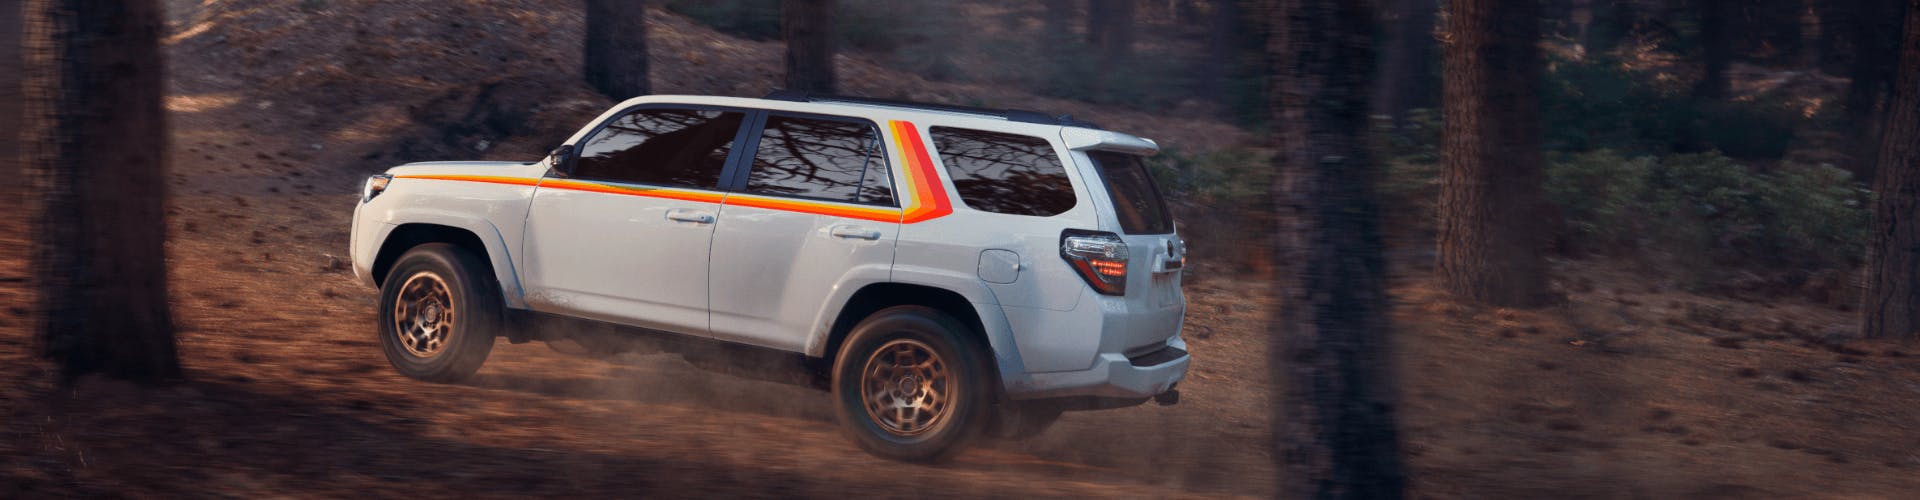 White Toyota 4Runner driving off-road surrounded by trees